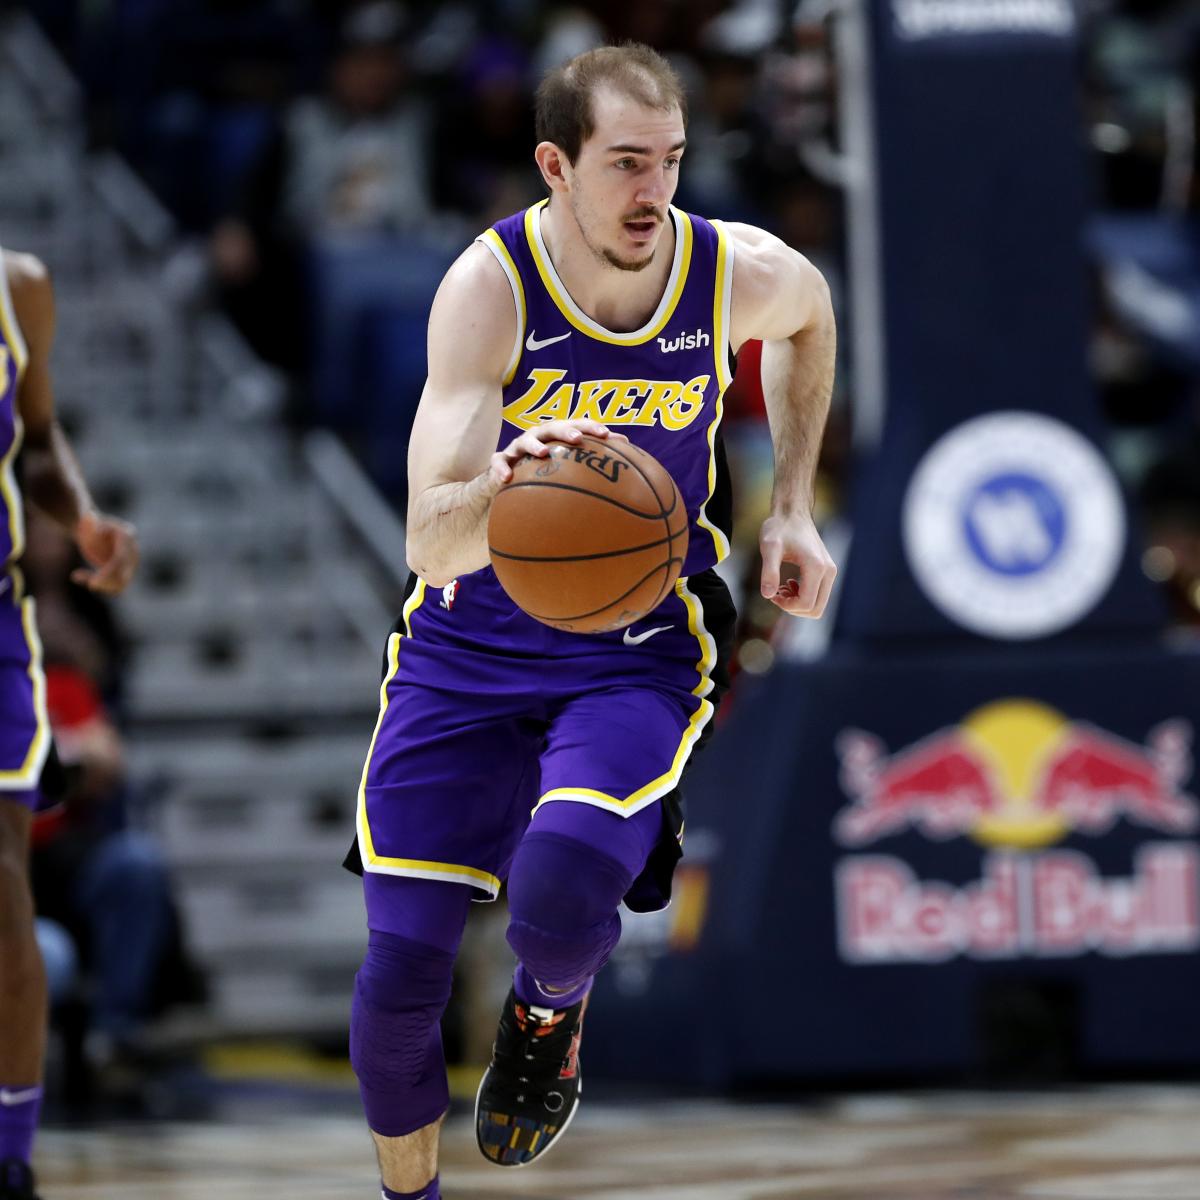 Wild Commercial Starring Lakers' Alex Caruso Goes Viral